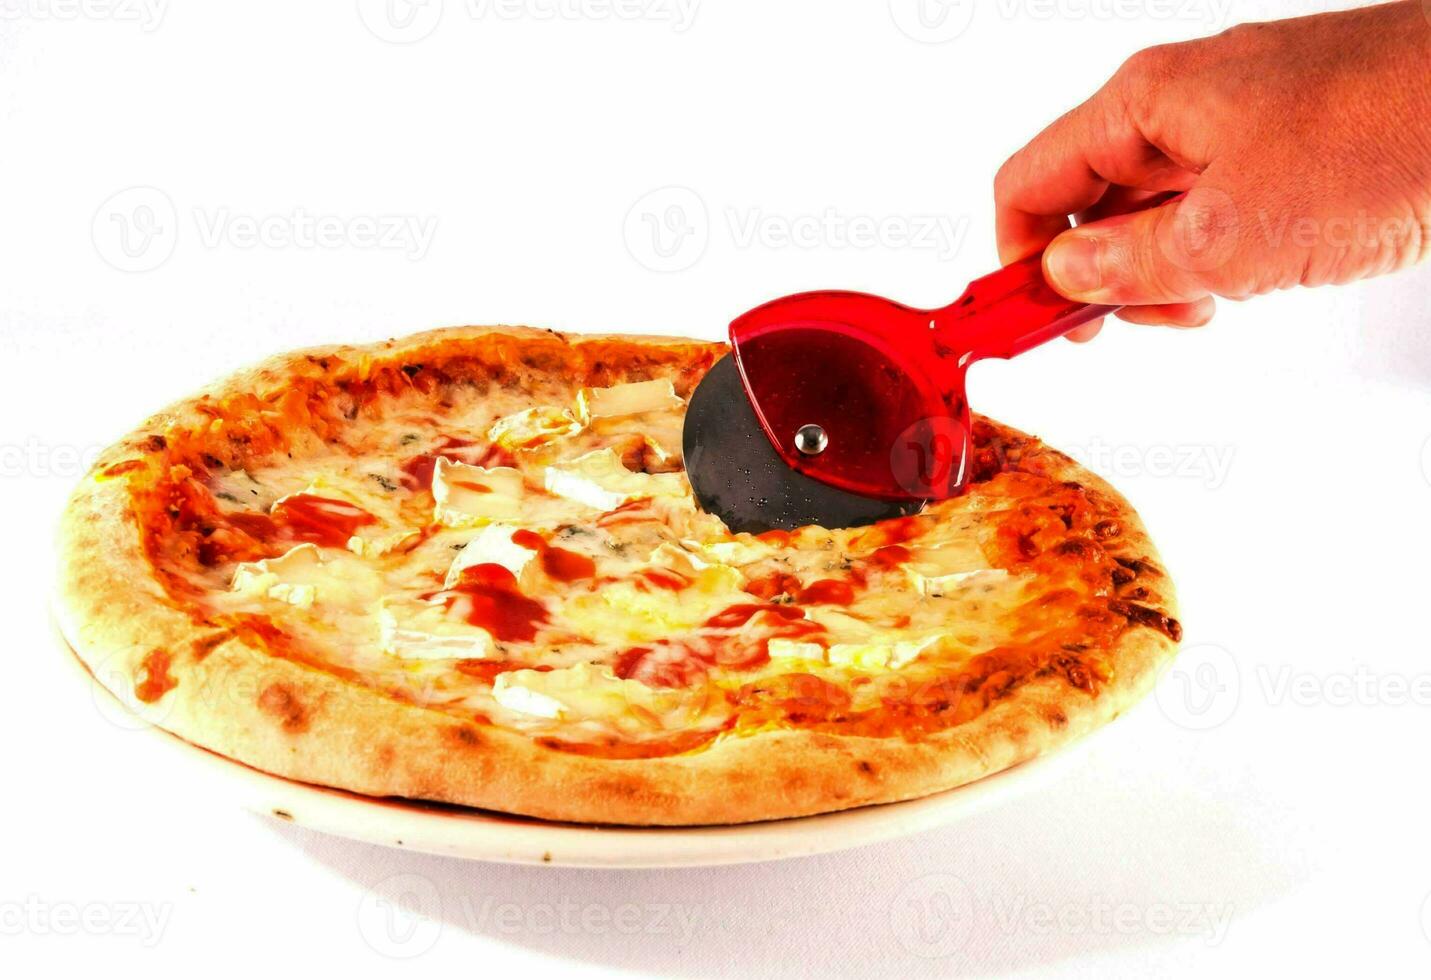 a person is using a pizza cutter to cut a pizza photo